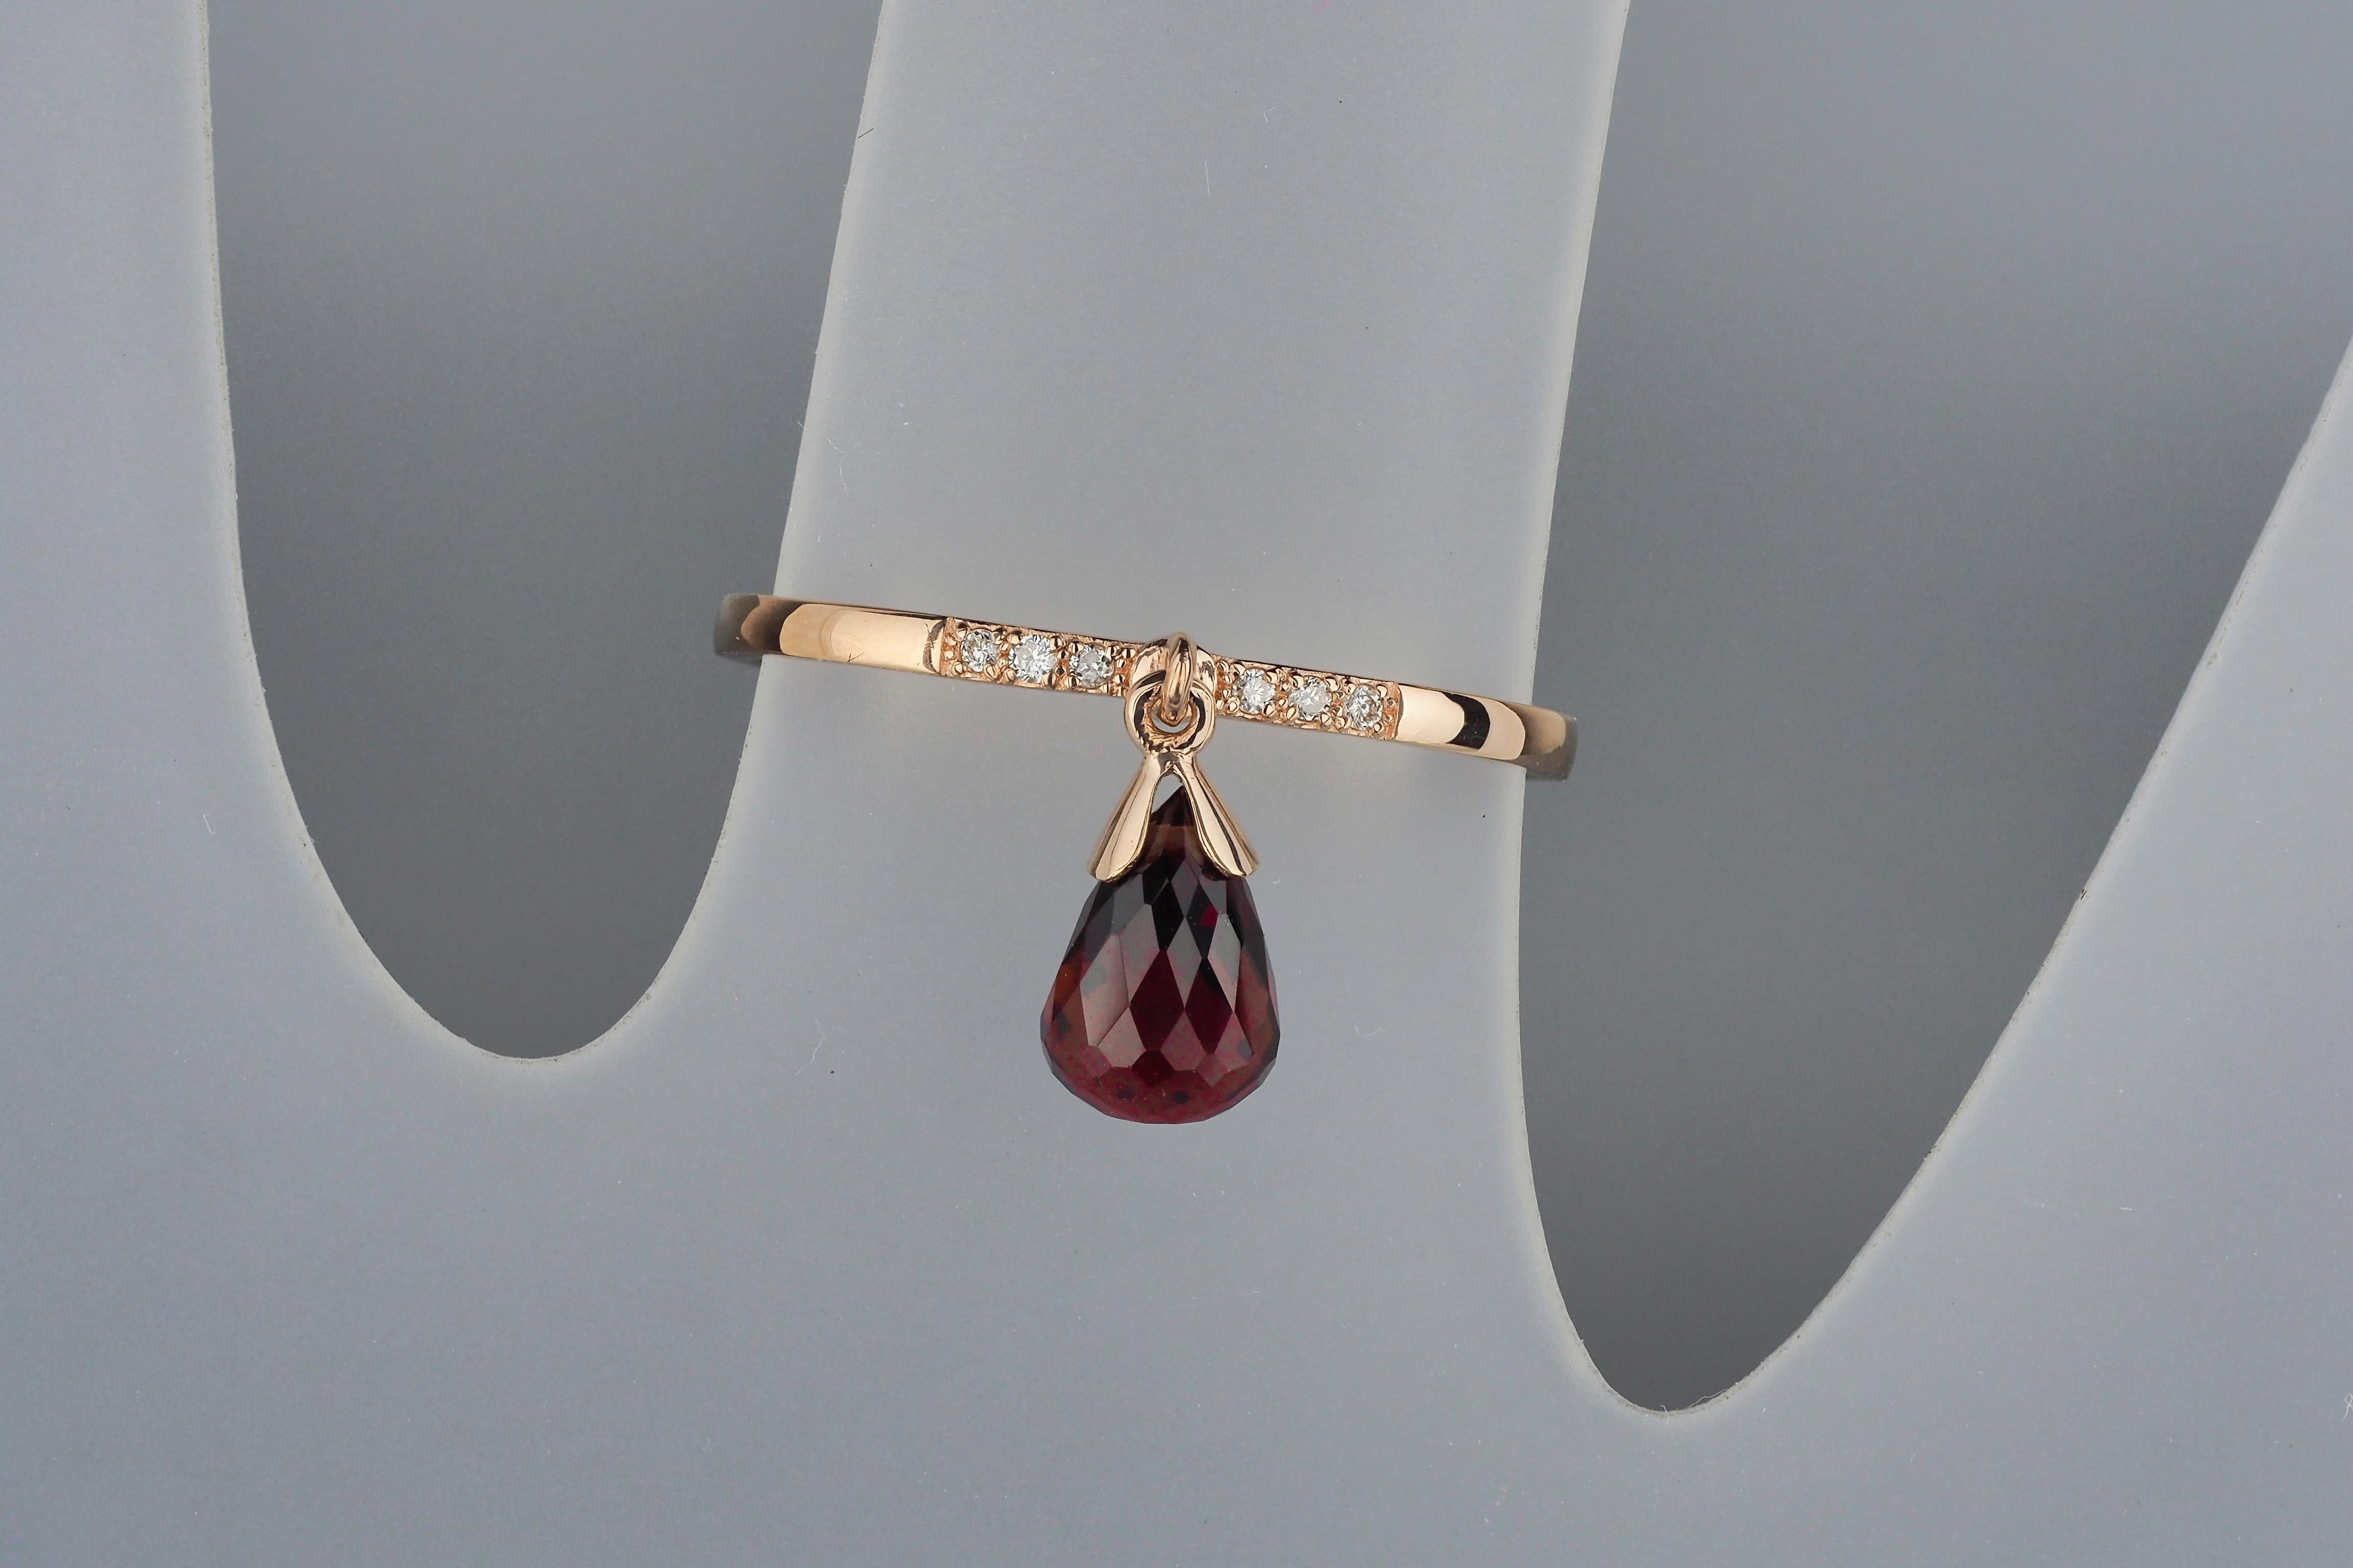 For Sale:  14k Gold Ring with Briolette Cut Garnet and Diamonds 10